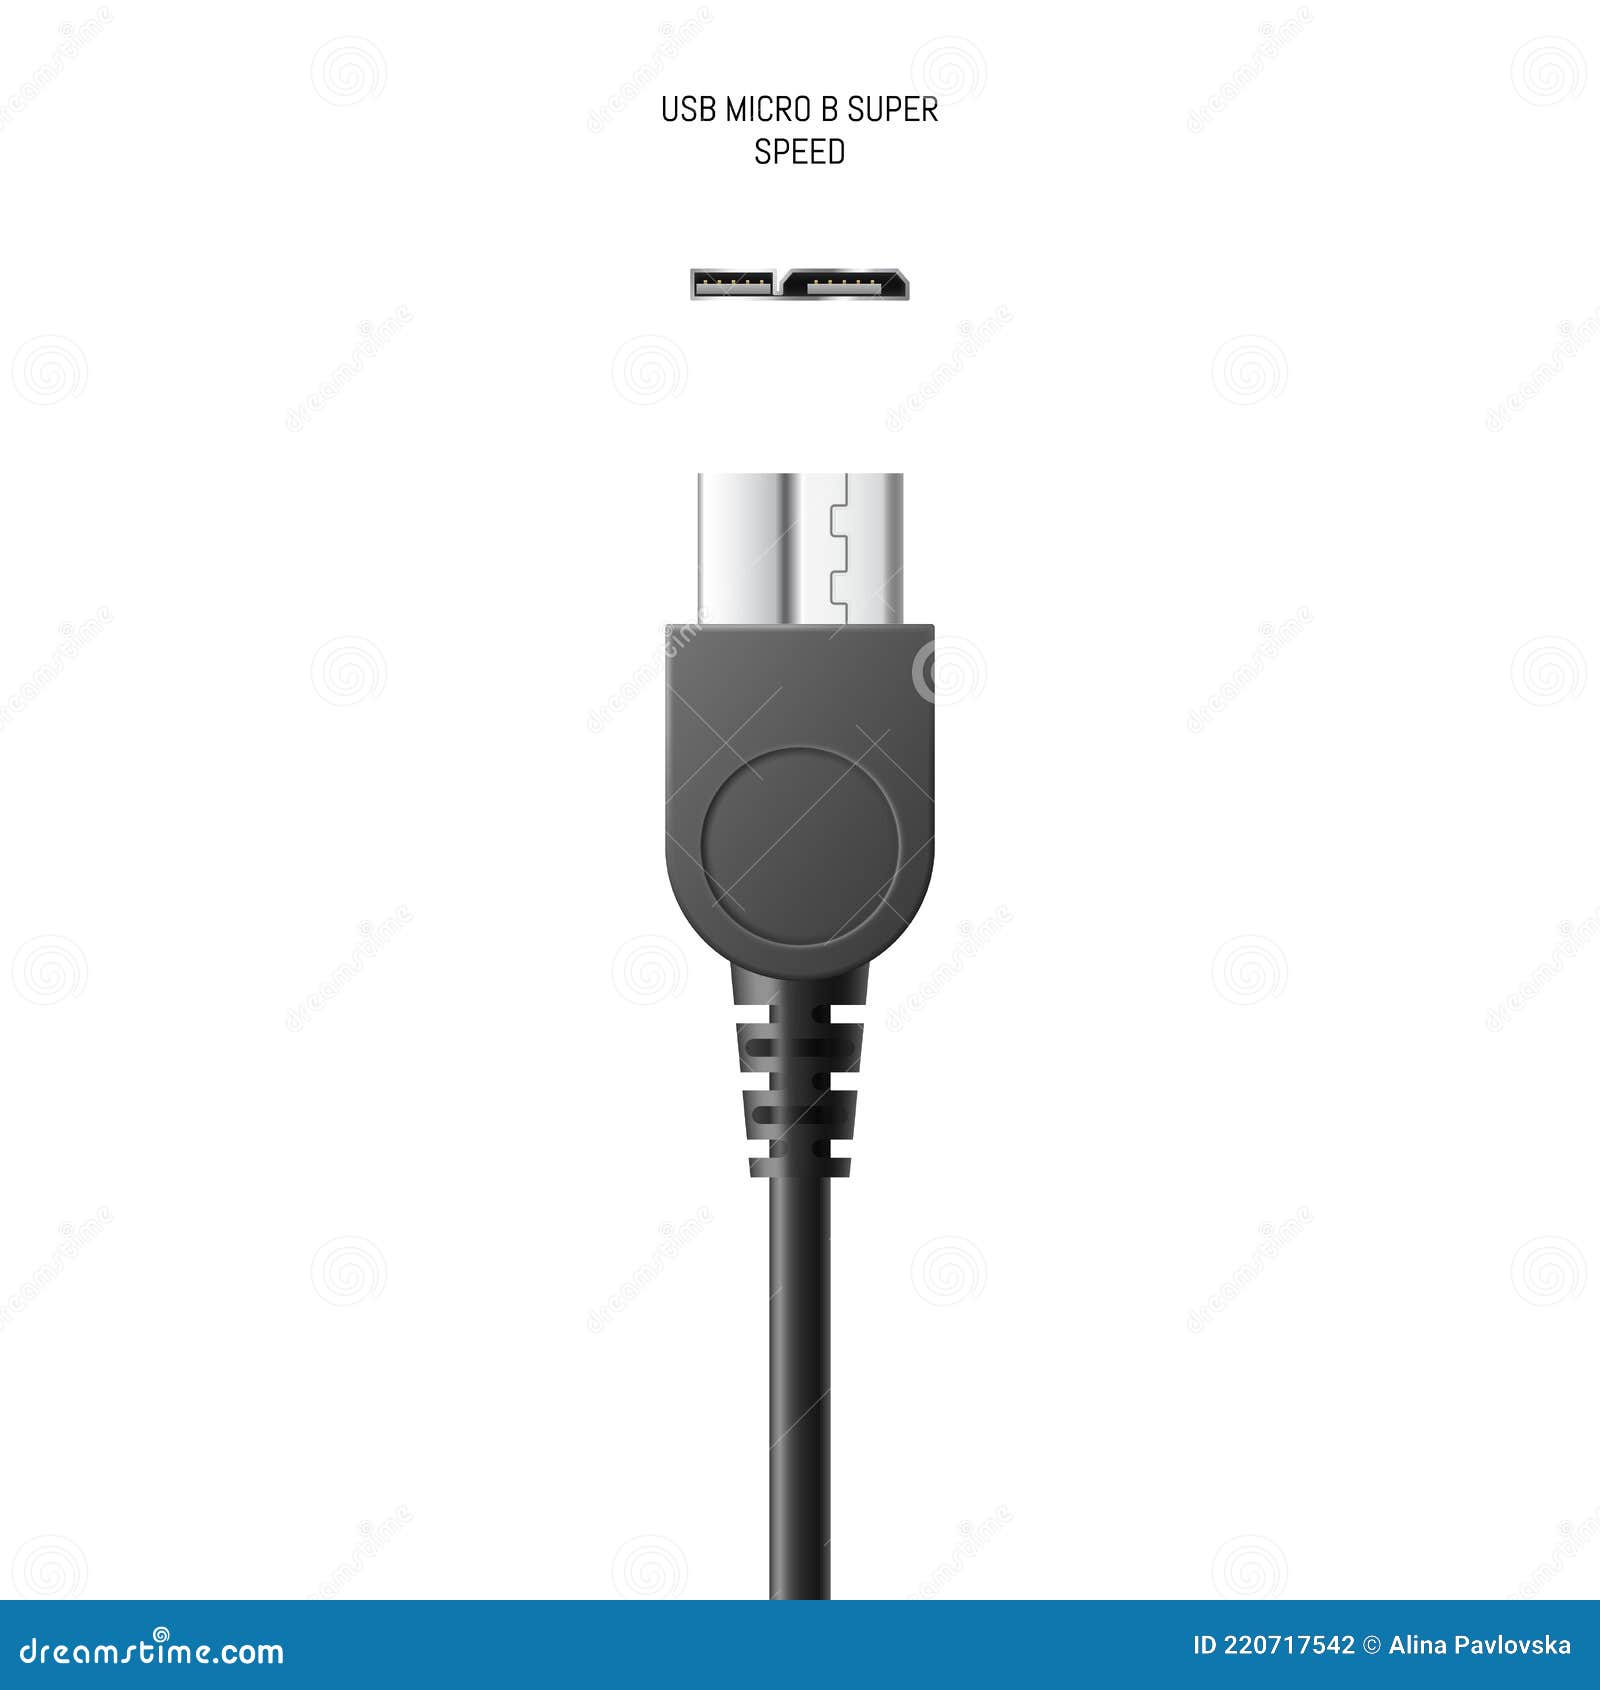 Free Vector  Cable ports chargers usb cables plugs and connectors set  types of mobile phone cords collection of black smartphone connection wires  on white background